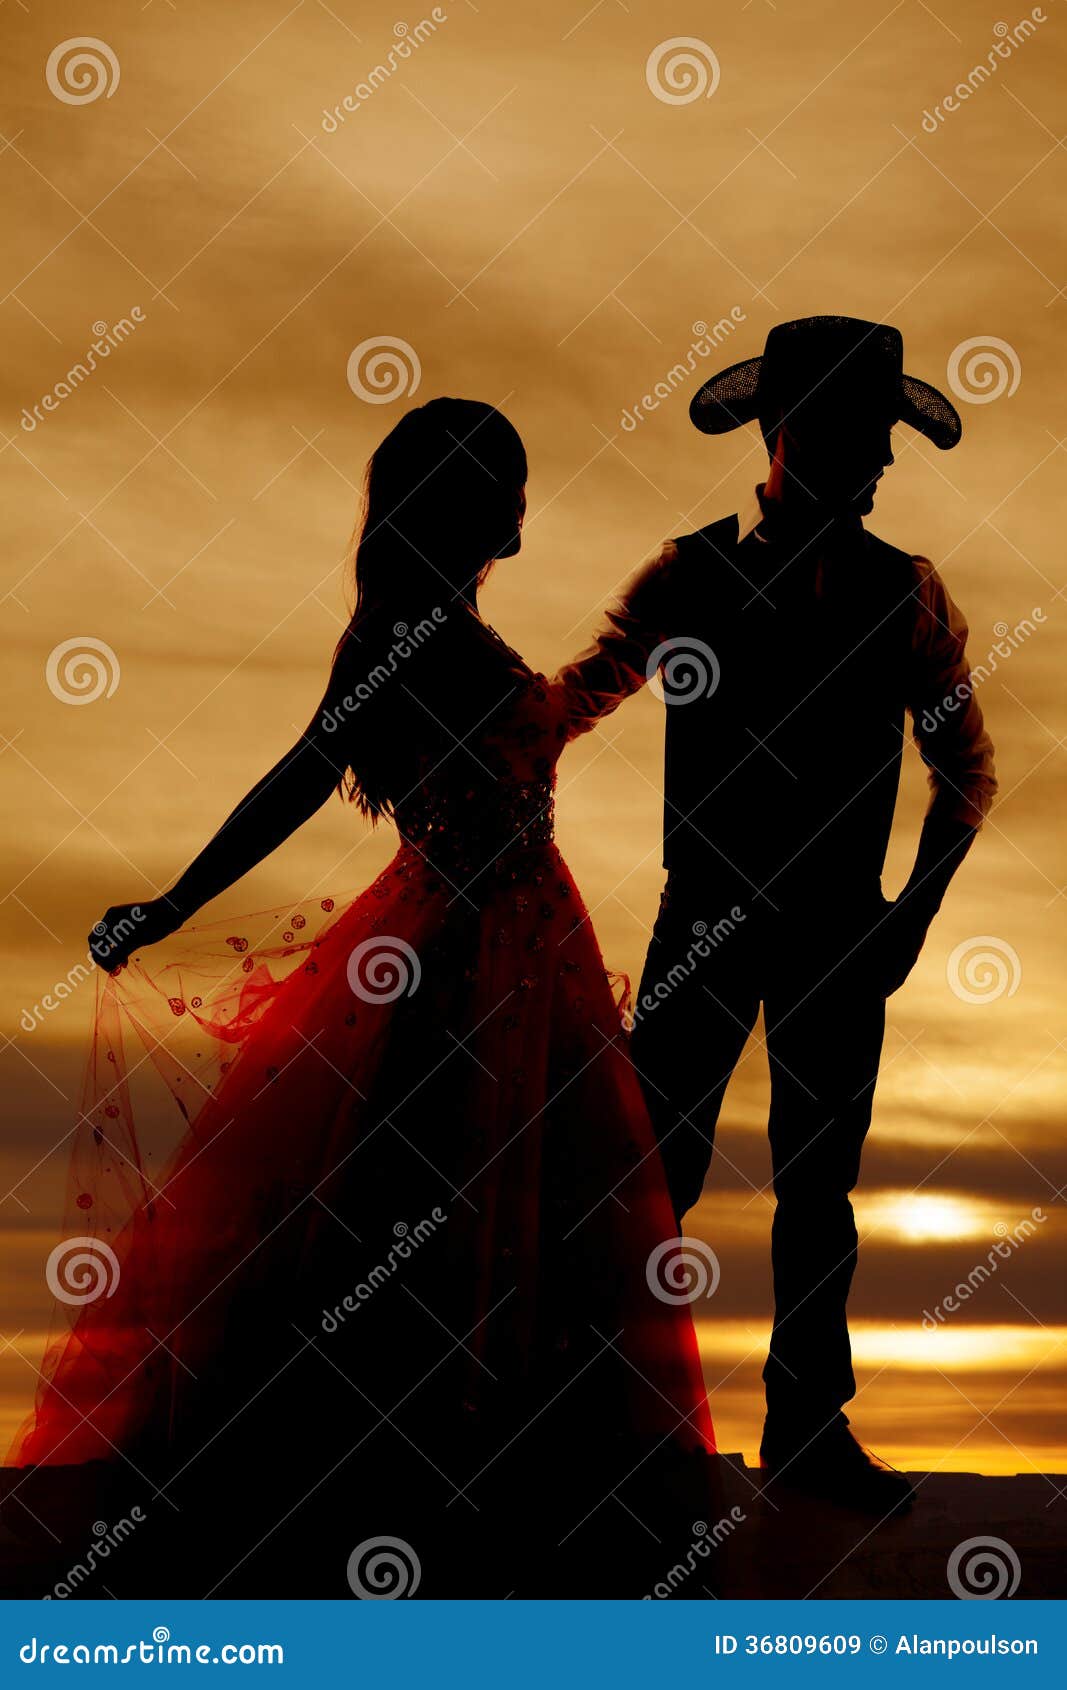 silhouette cowboy and woman in dress